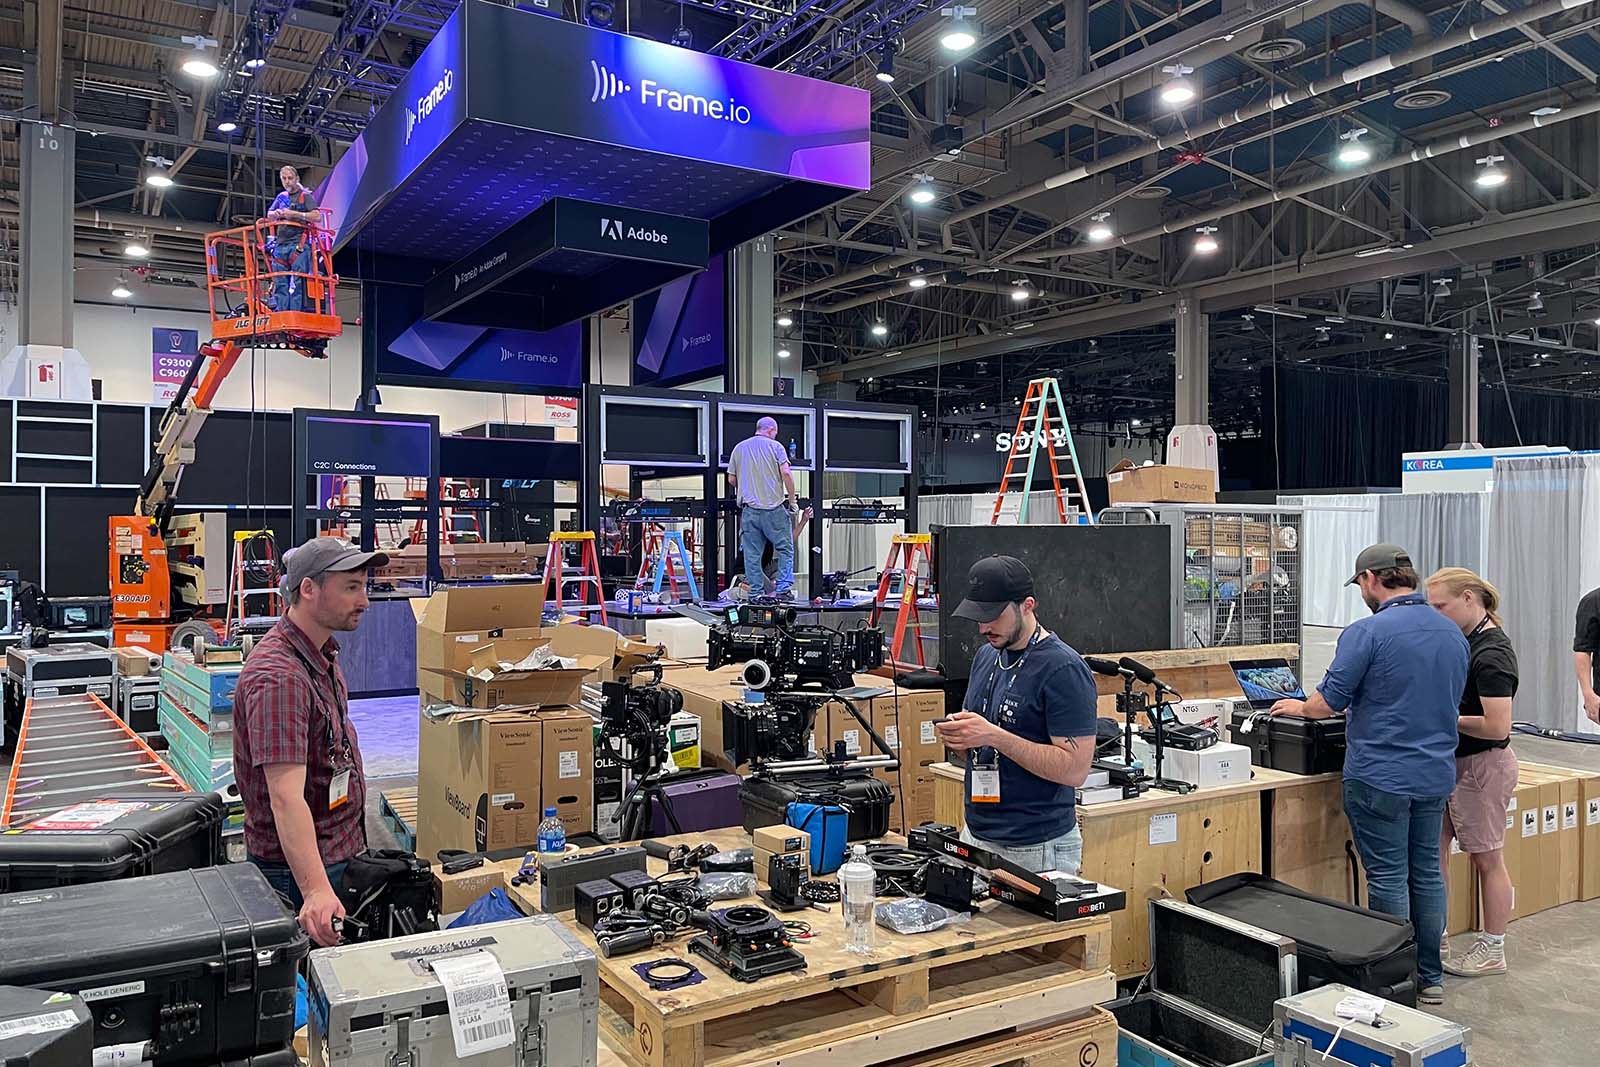 All hands on deck. Setting up our NAB booth was no small feat.